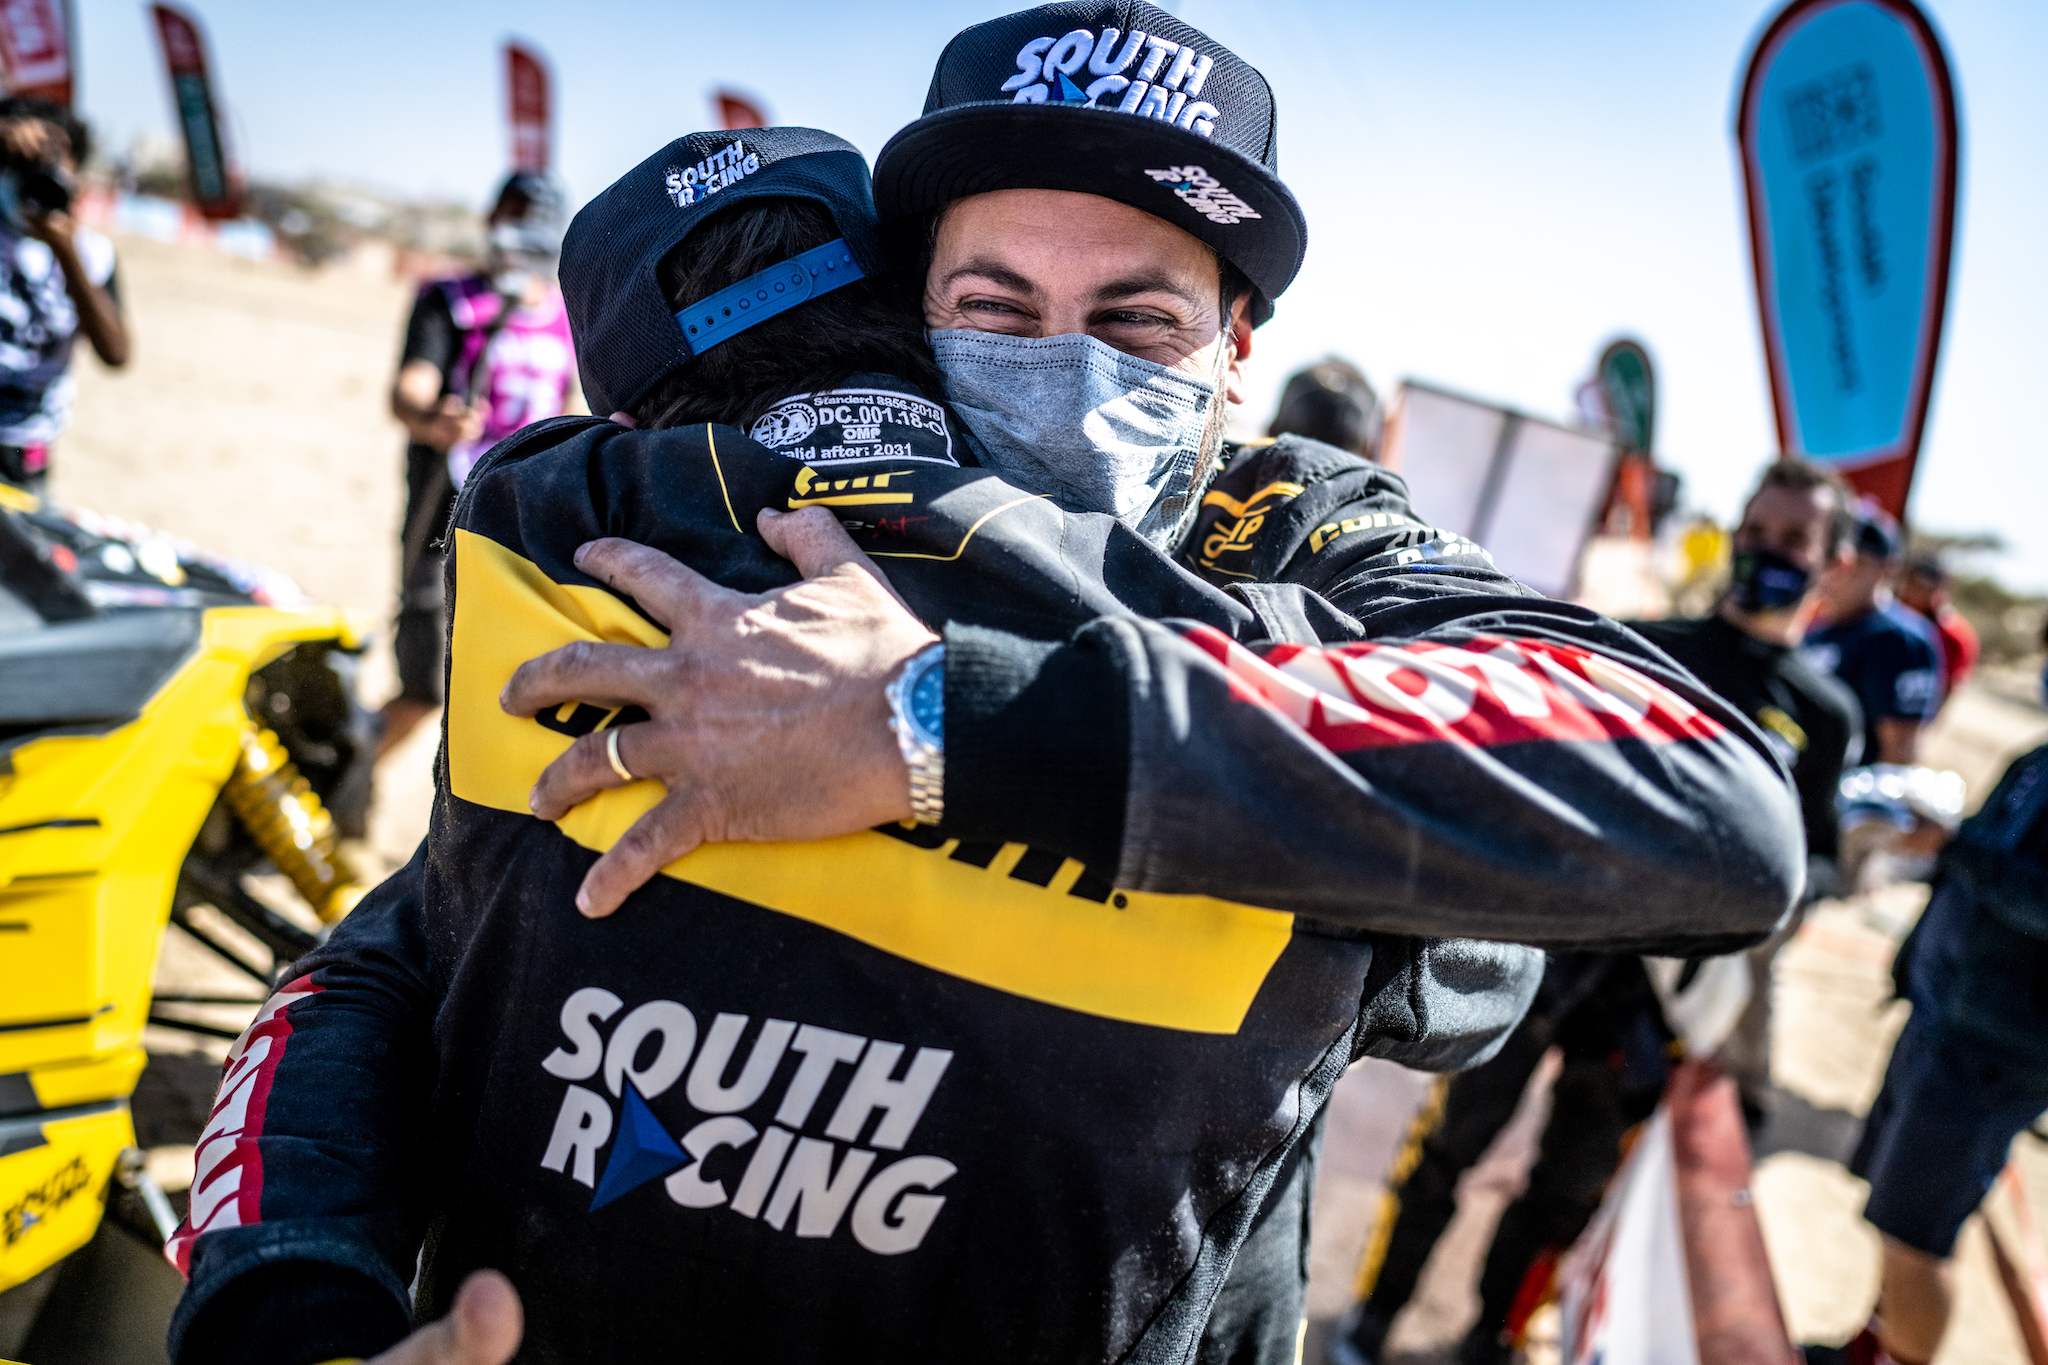 CAN-AM OFF-ROAD TAKES HOME THE DAKAR RALLY CHAMPIONSHIP FOR THE FIFTH CONSECUTIVE YEAR!